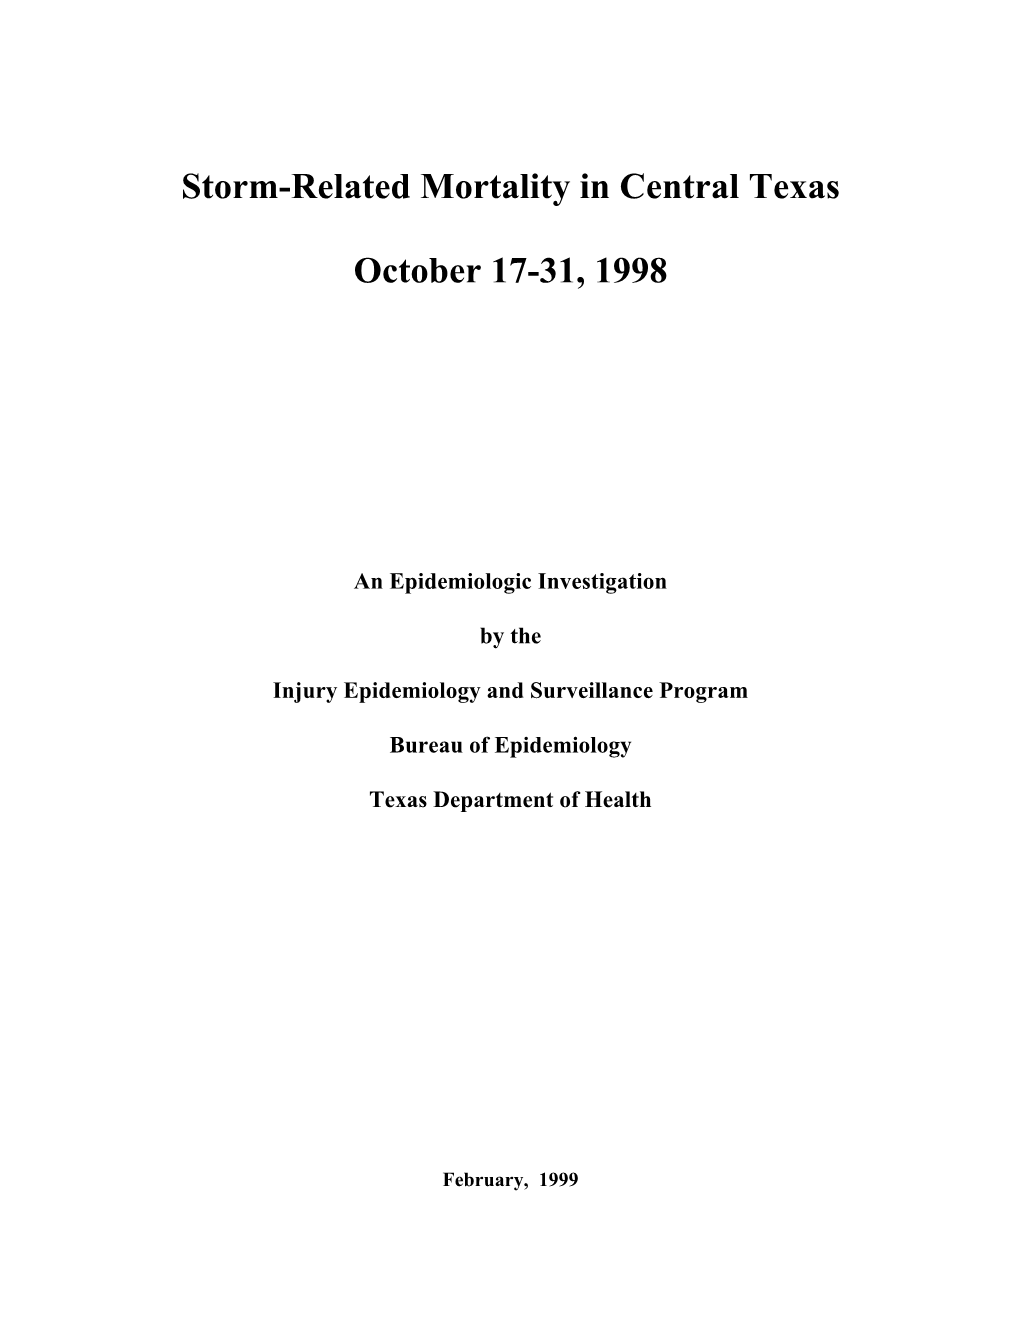 Storm-Related Mortality in Central Texas October 17-31, 1998